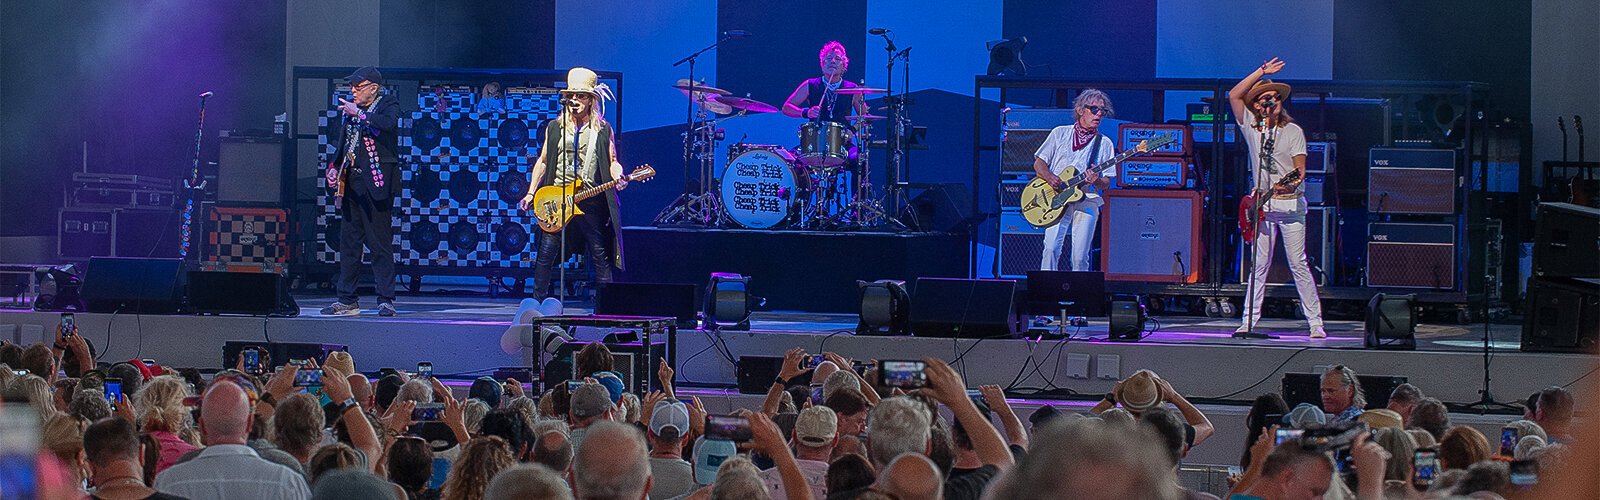 The free Cheap Trick concert at The Sound starts a busy run of shows by national headliners at the new amphitheater, which Ruth Eckerd Hall manages and operates through an agreement with the City of Clearwater.